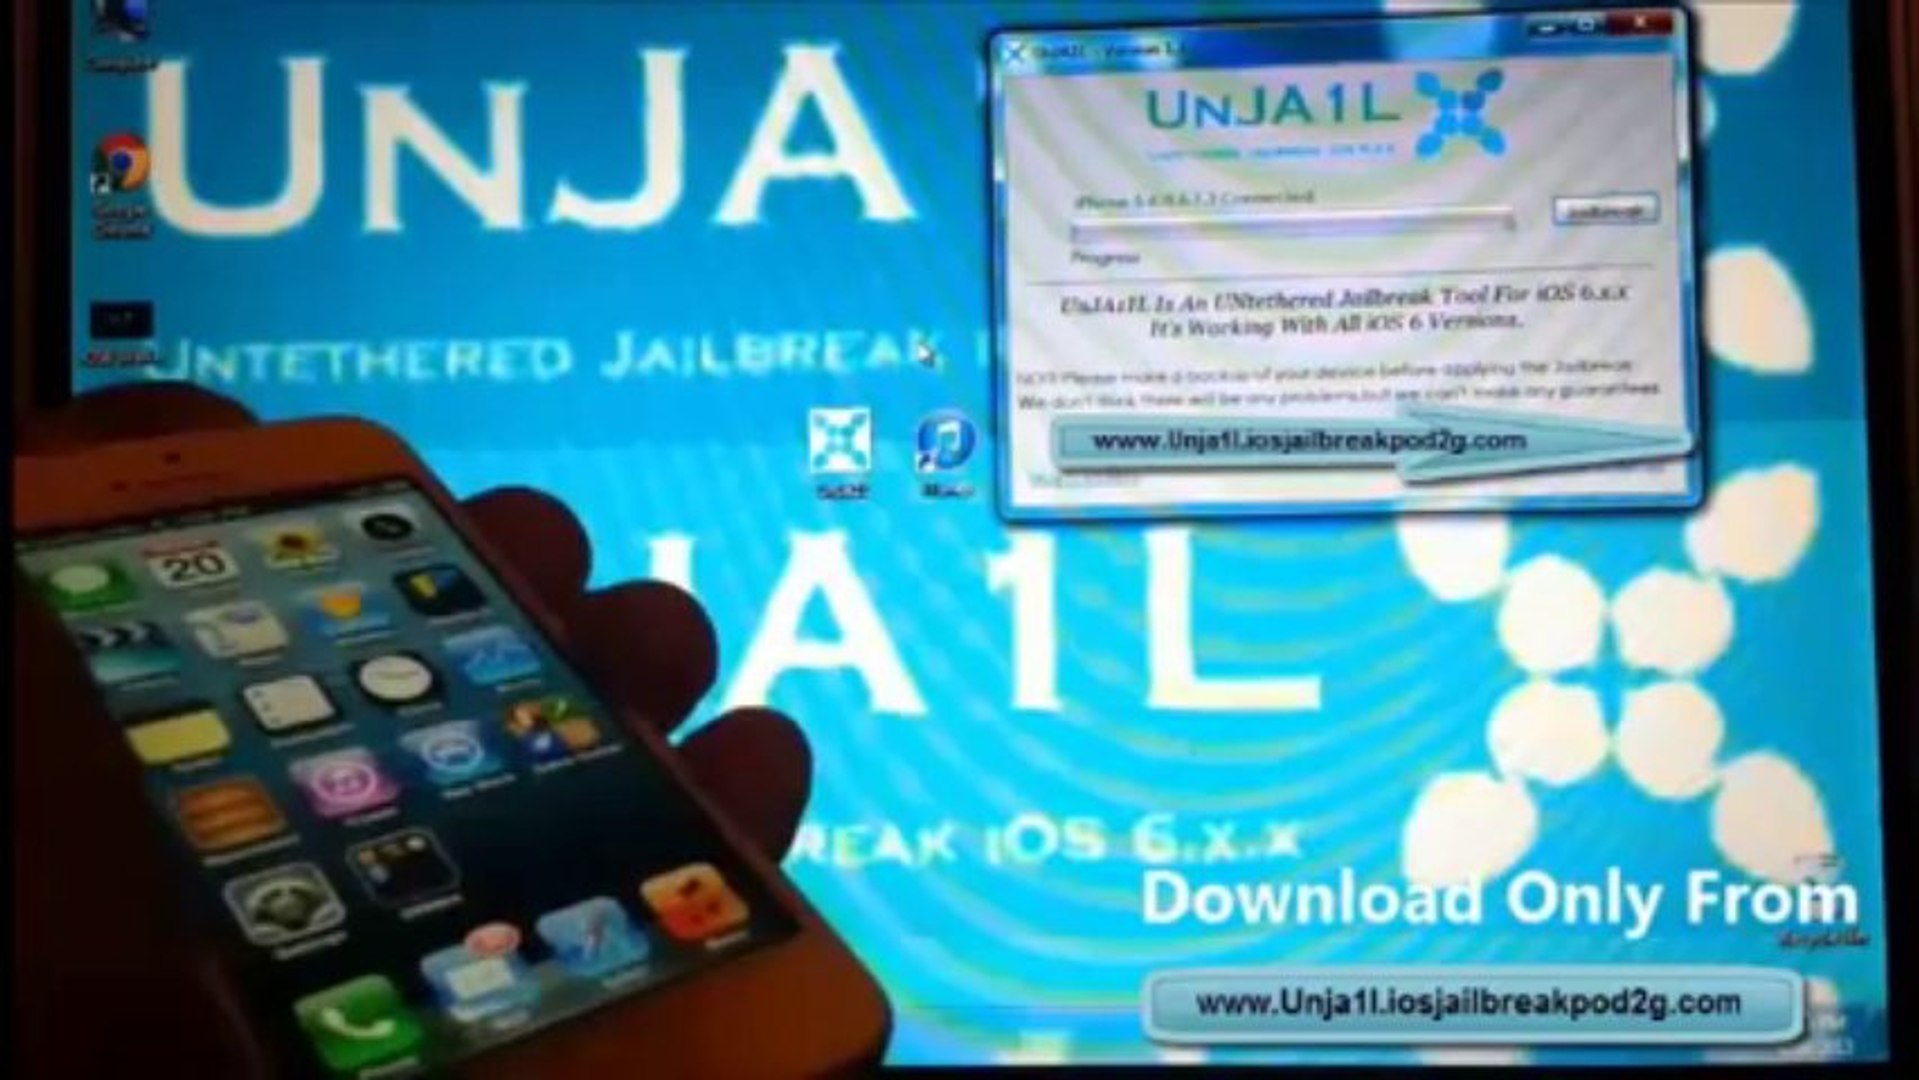 Install Untethered Jailbreak Ios 6 1 3 Unjail Apps Pod2g Releasedios 6 1 3 Ios Apple Applications Everytime Lovely Touch Steve Case Giveaway Free Running Old Toontown Ipod Iphone5s Iphone4 Iphone5 Iphone4s Untethered Unlock Cydia Tutorials Siri On